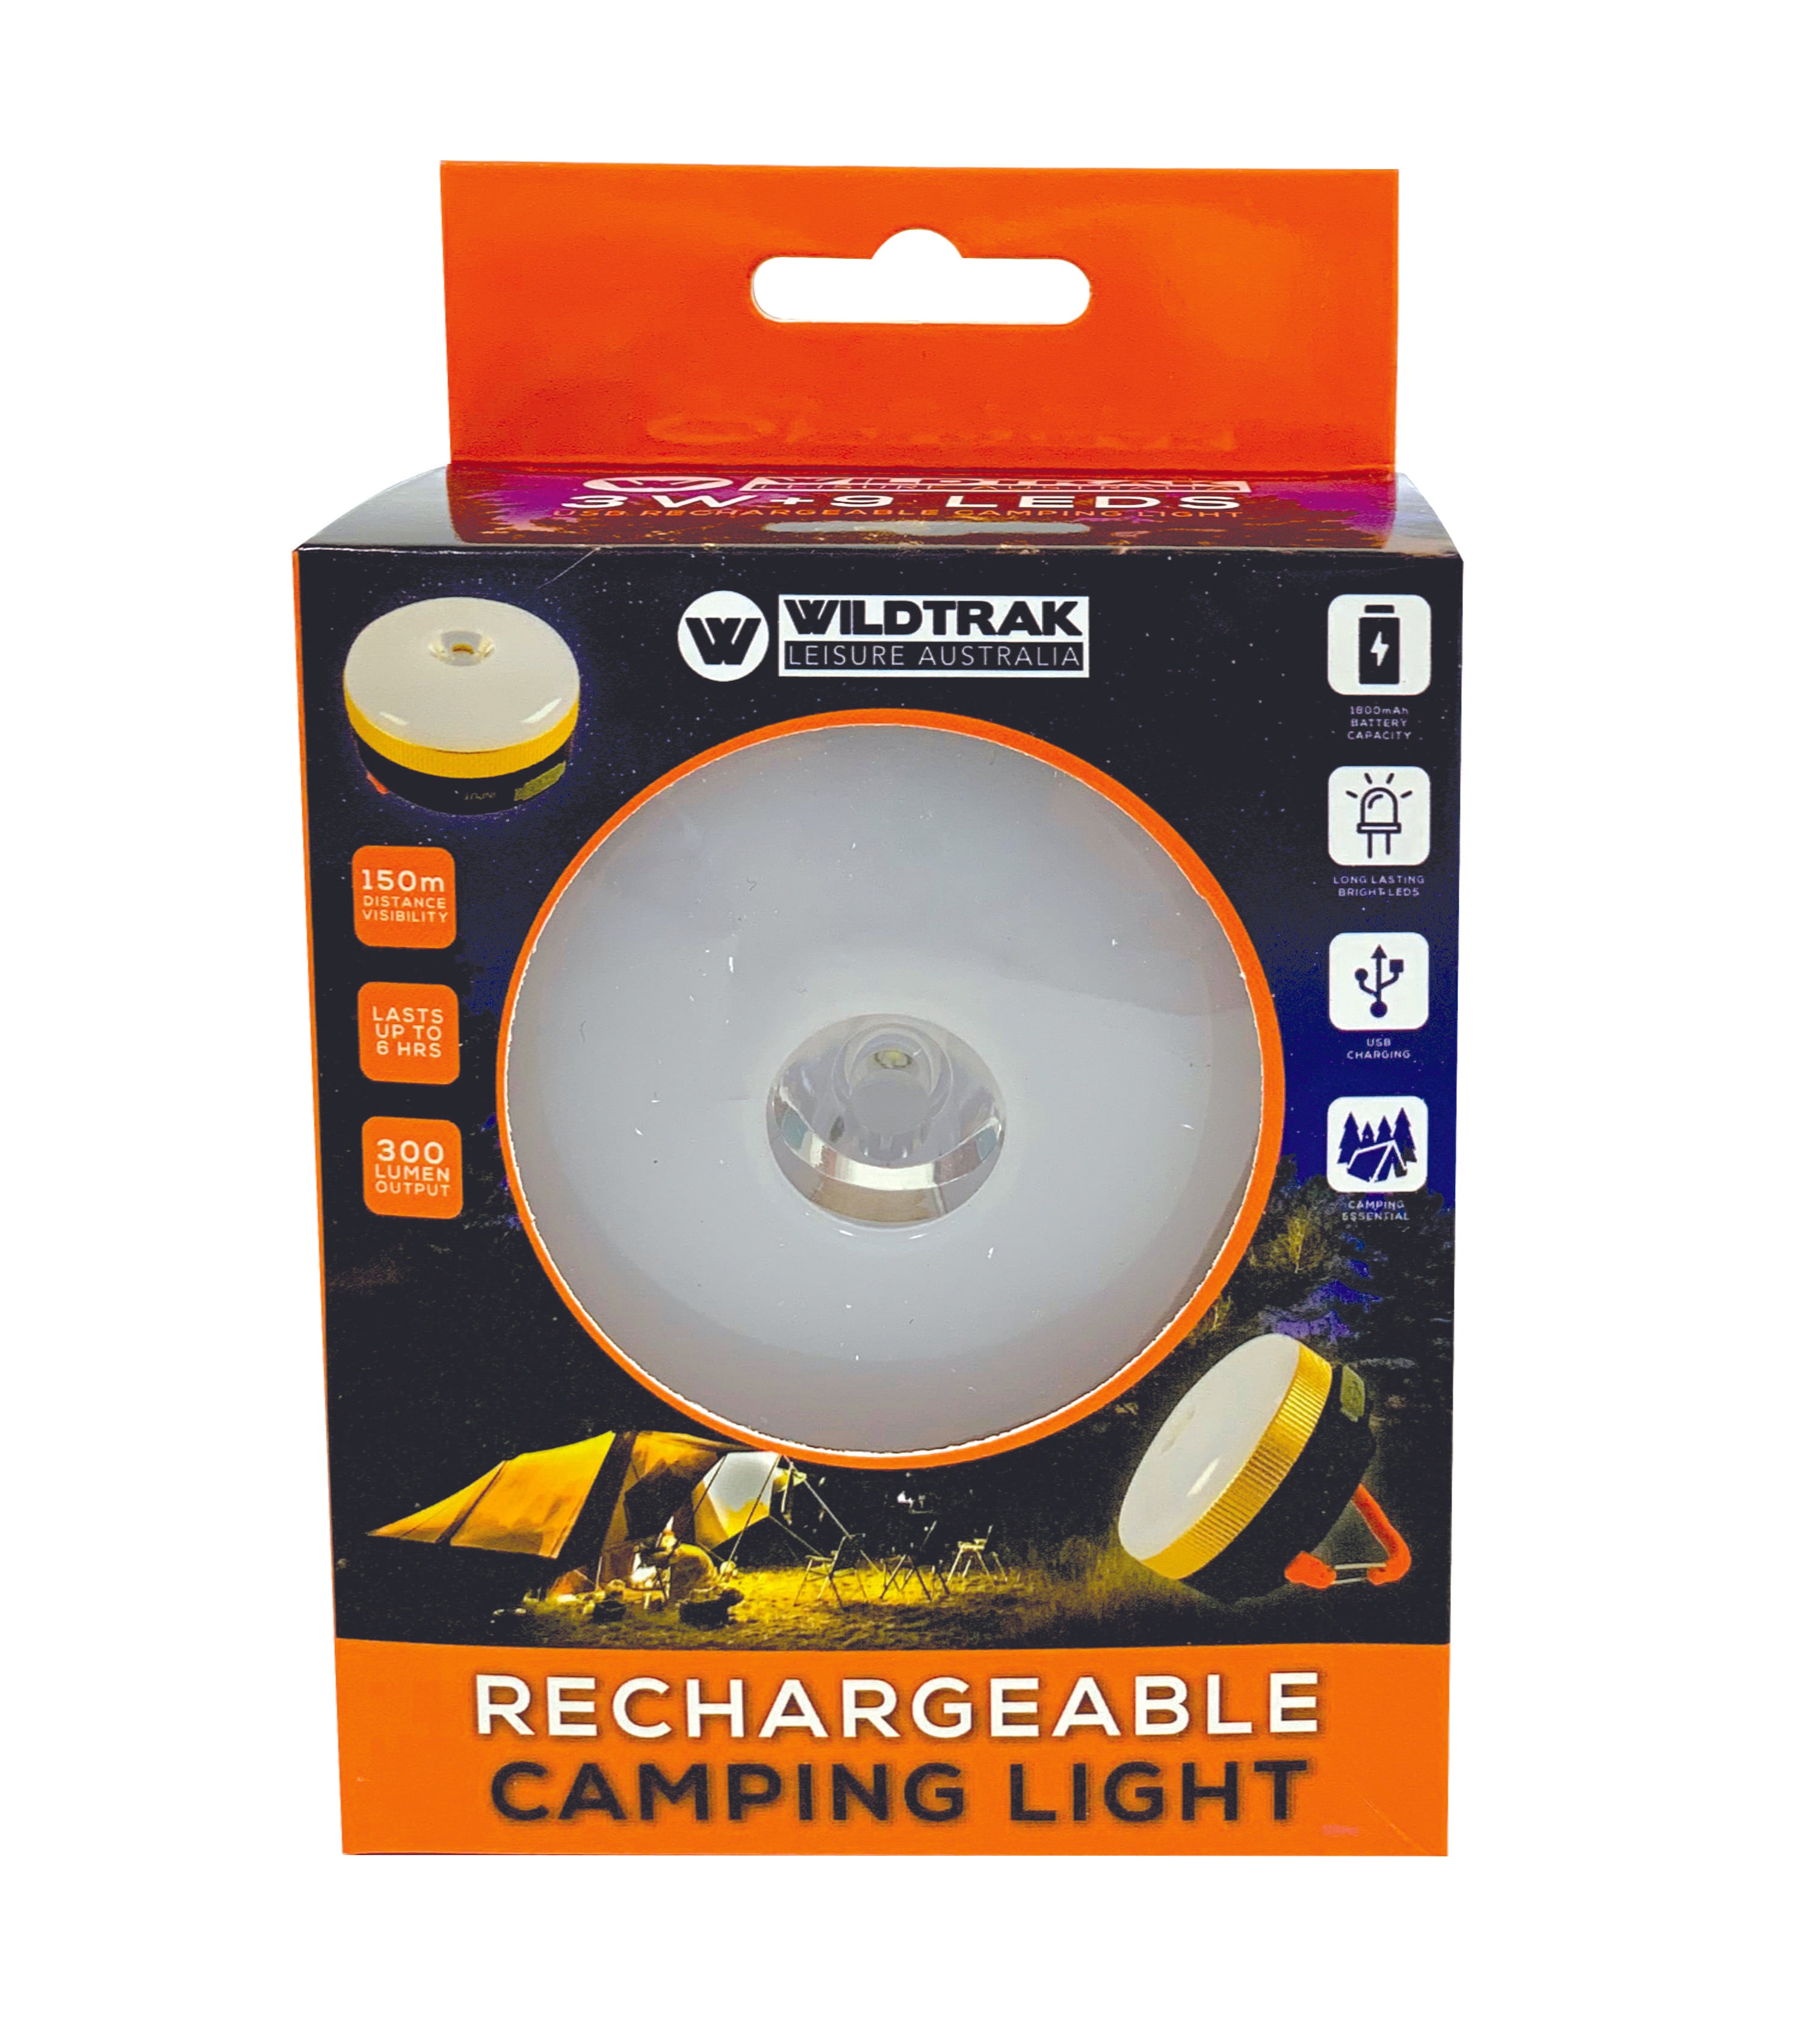 RECHARGEABLE BASE 70 MULTI FUNCTION CAMP LIGHT